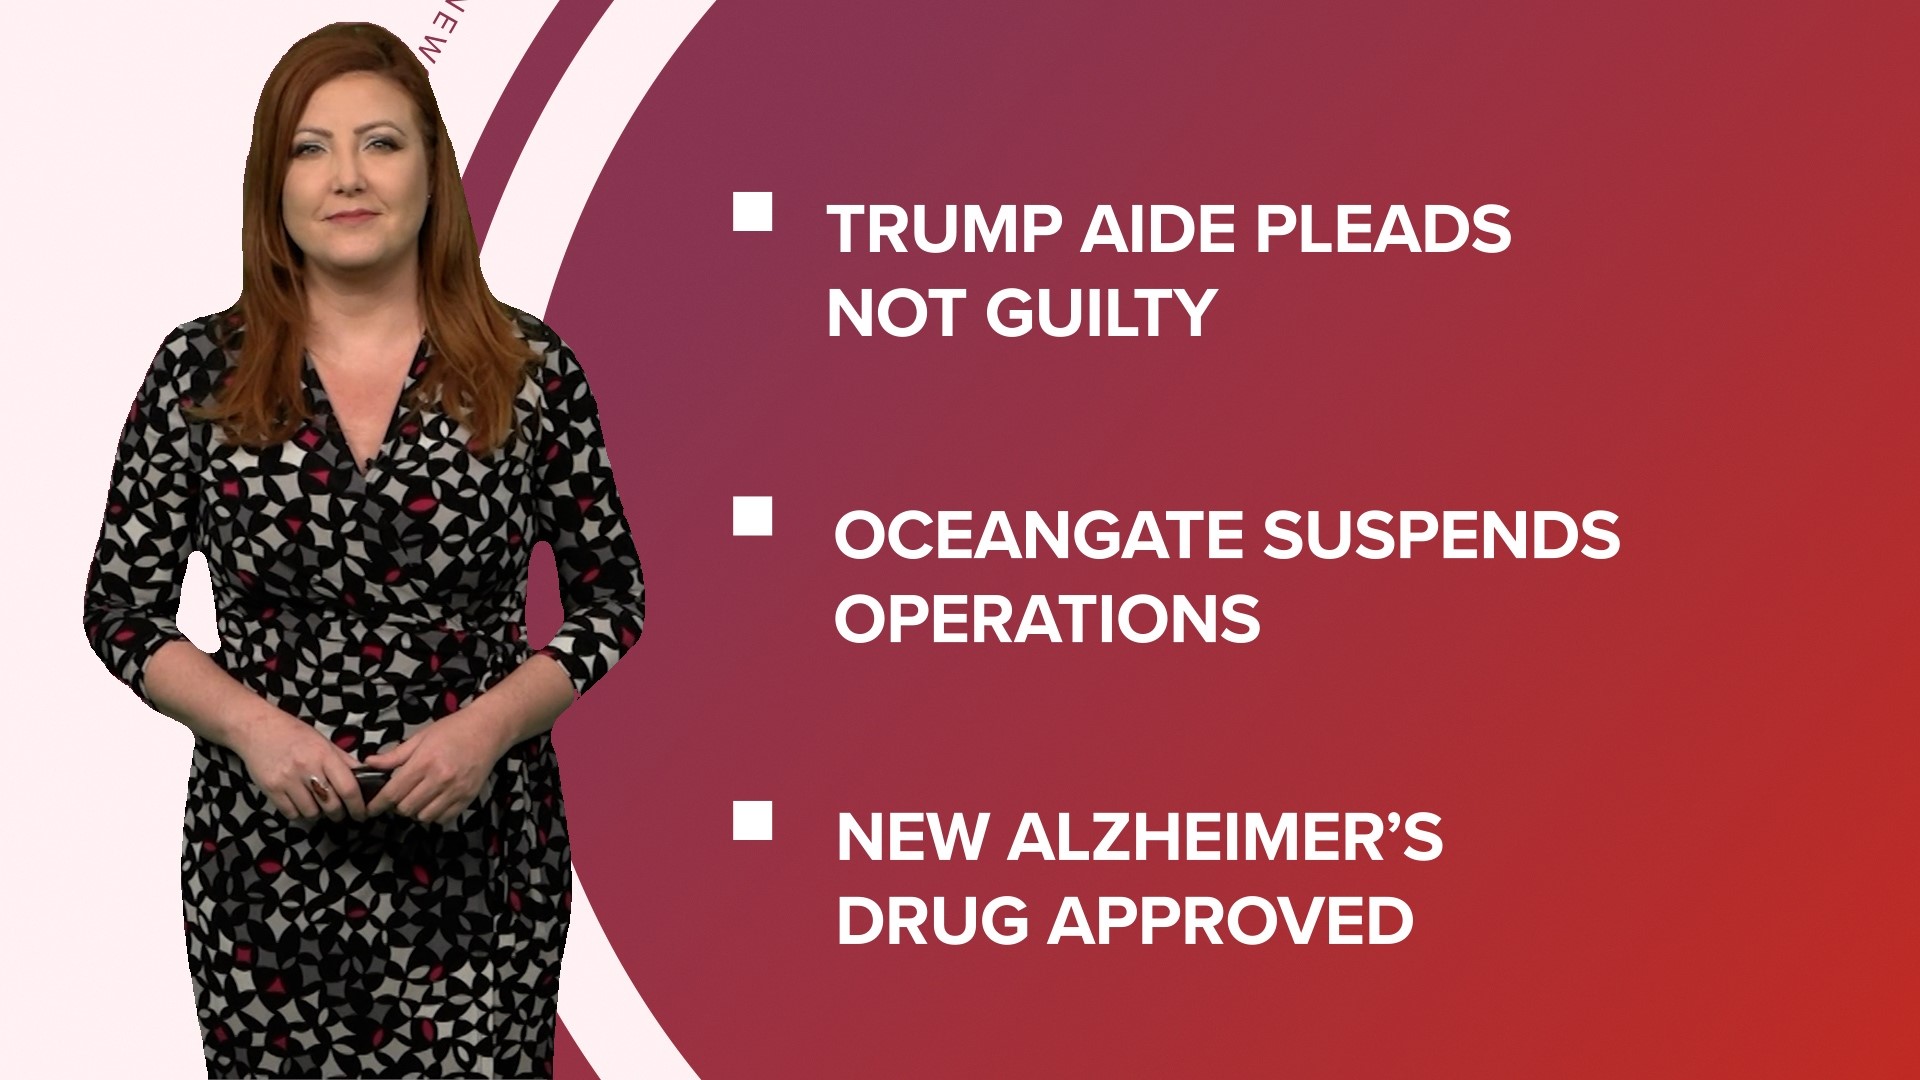 A look at what is happening in the news from a Trump aide pleading not guilty in a classified documents case to the FDA approving a new Alzheimer's drug.